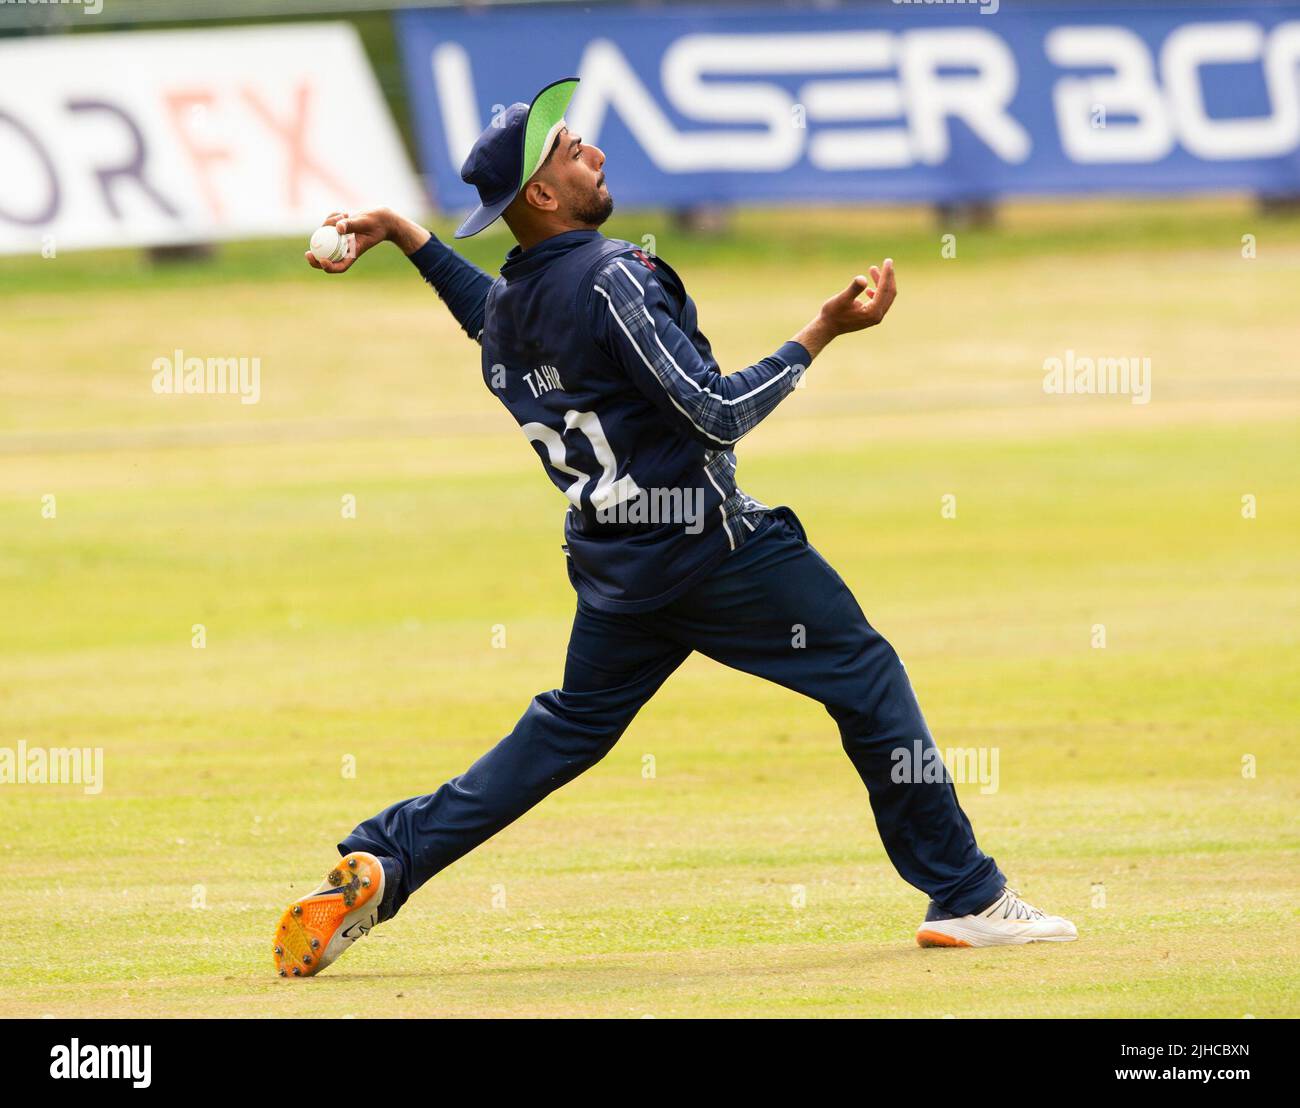 ICC Men's Cricket World Cup League 2 - Scotland v, Nepal. 17th July, 2022. Scotland take on Nepal for the second time in the ICC Div 2 Men's Cricket World Cup League 2 at Titwood, Glasgow. Pic shows: Scotland's Hamza Tahir fields. Credit: Ian Jacobs/Alamy Live News Stock Photo